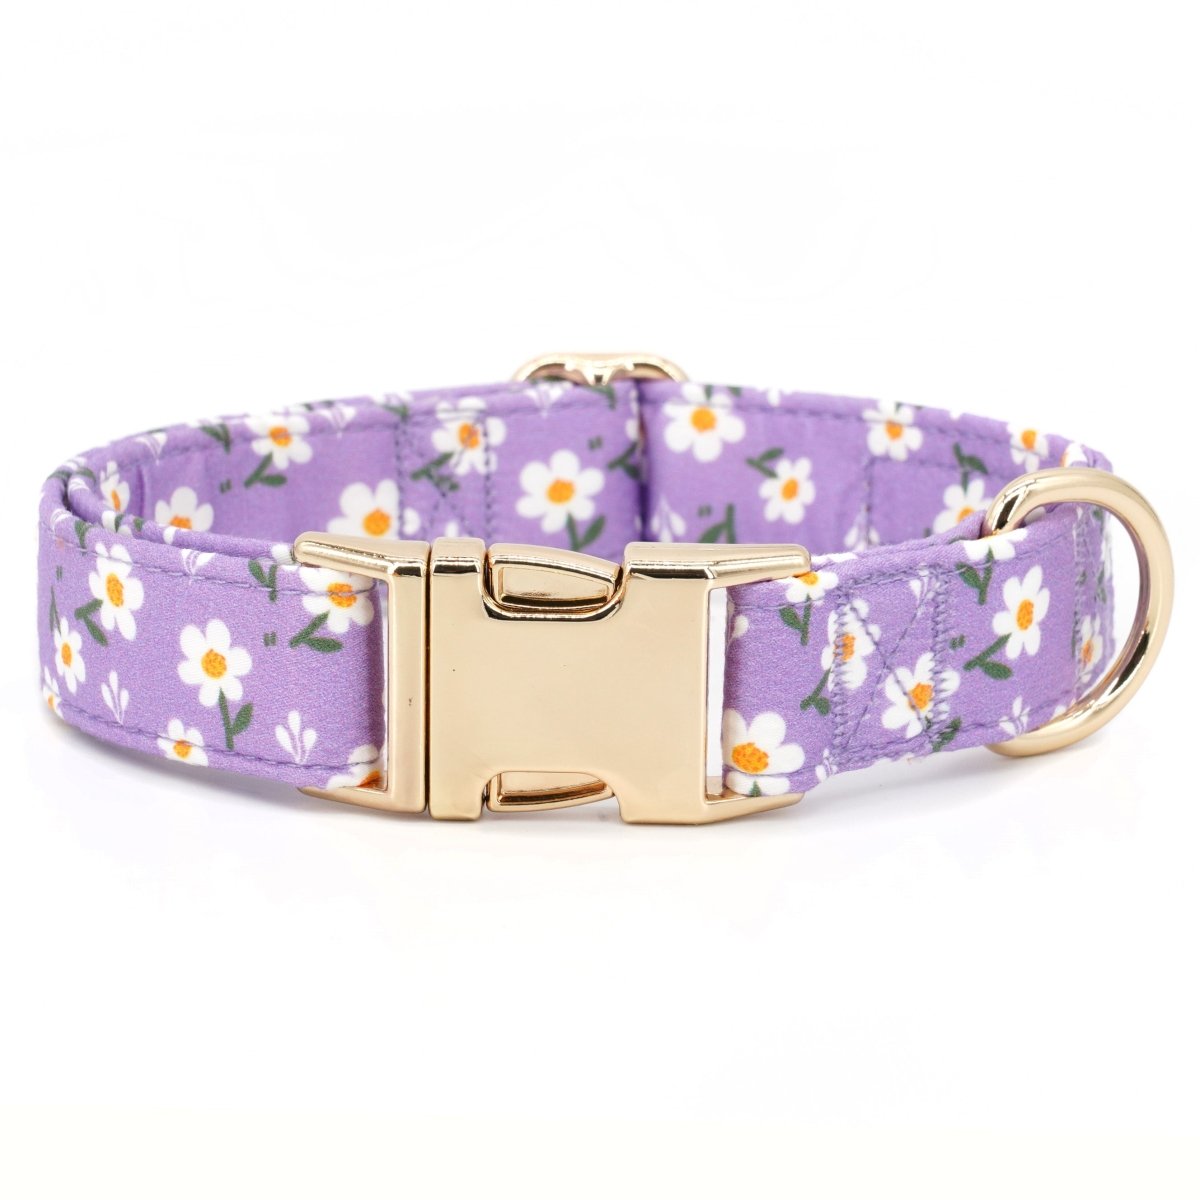 Cute & Super Safe Hardware Buckle Collar with Name for Dogs